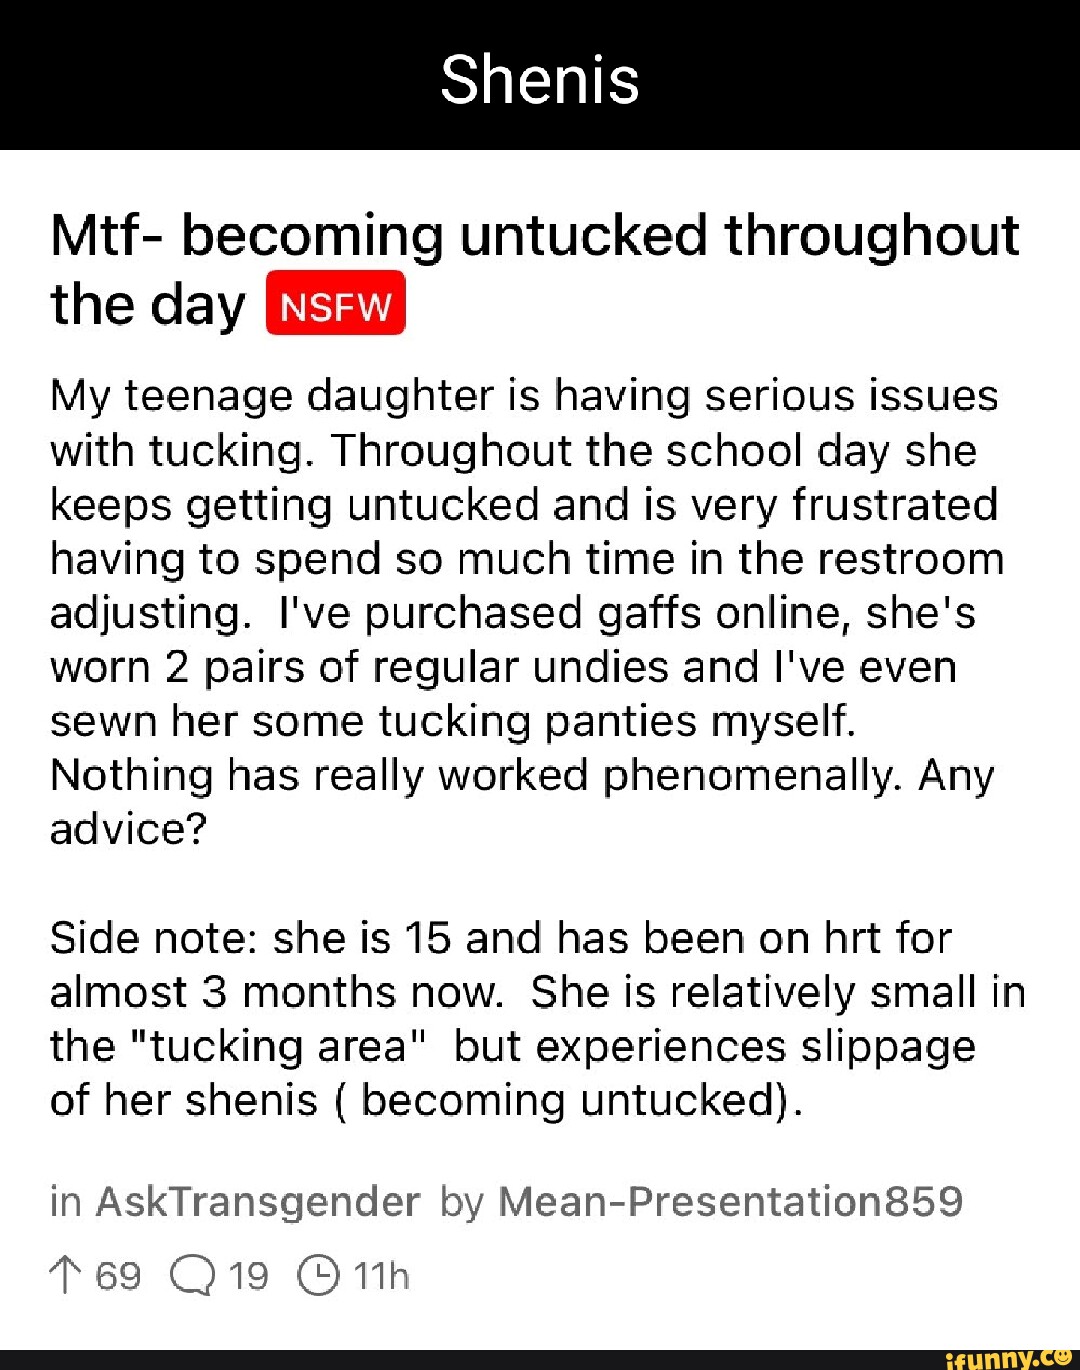 Is Mtf- becoming untucked throughout the day My teenage daughter is having  serious issues with tucking.